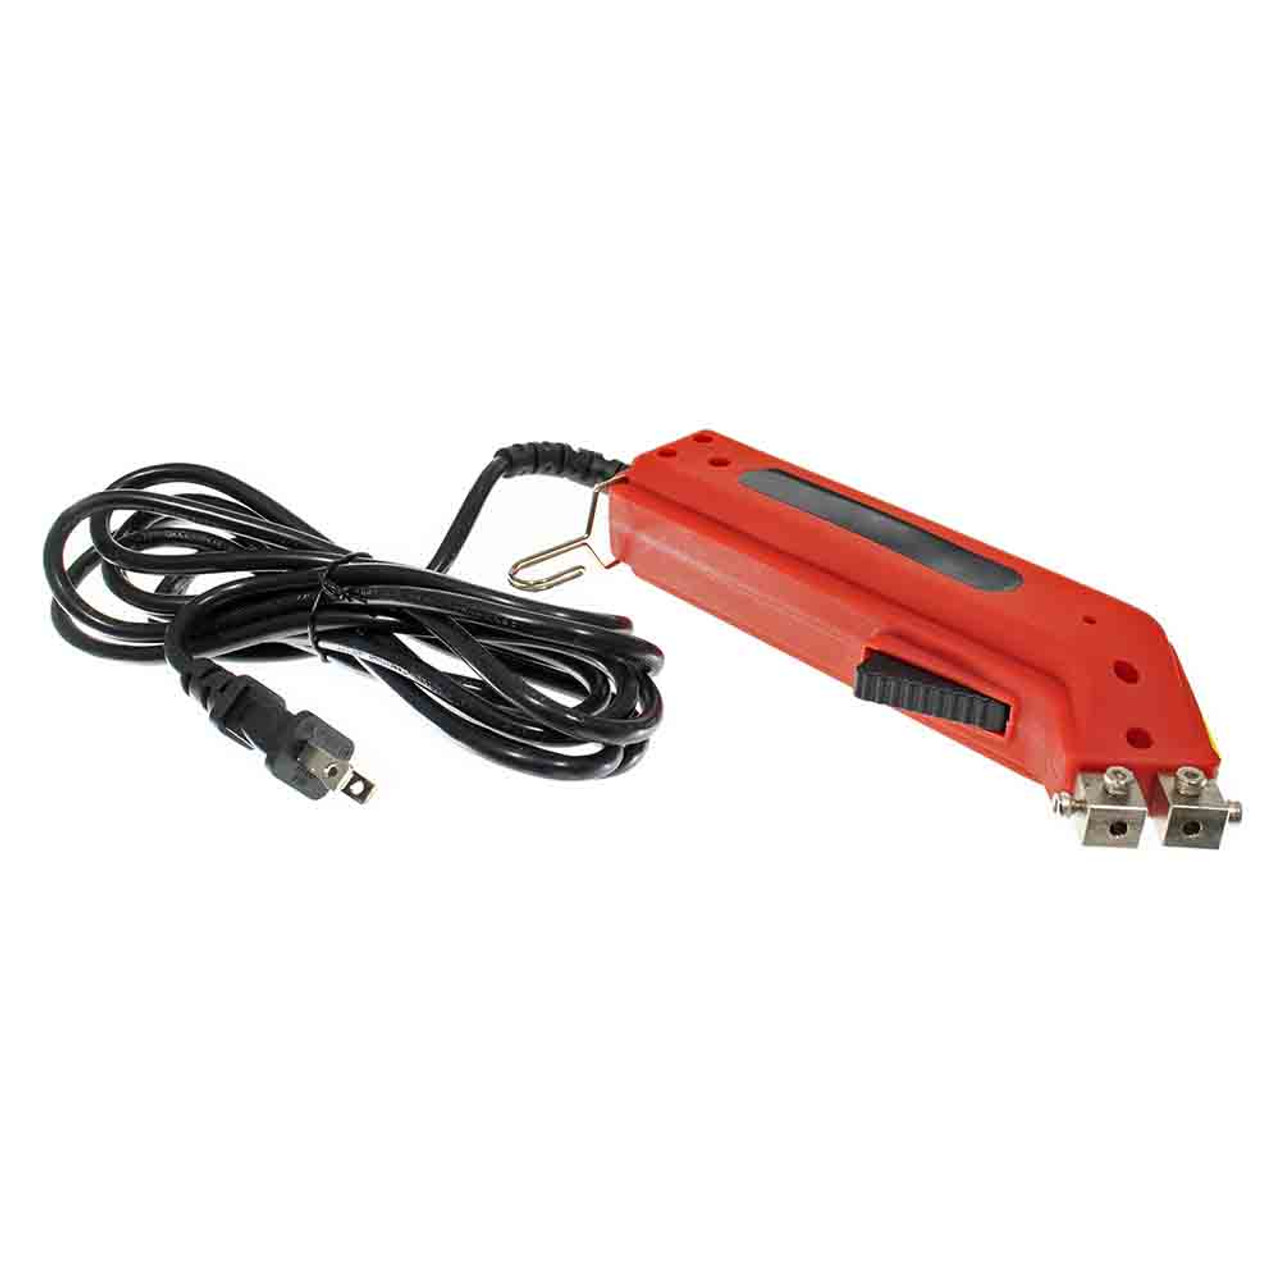 China Electric Hot Knife, Electric Hot Knife Wholesale, Manufacturers,  Price